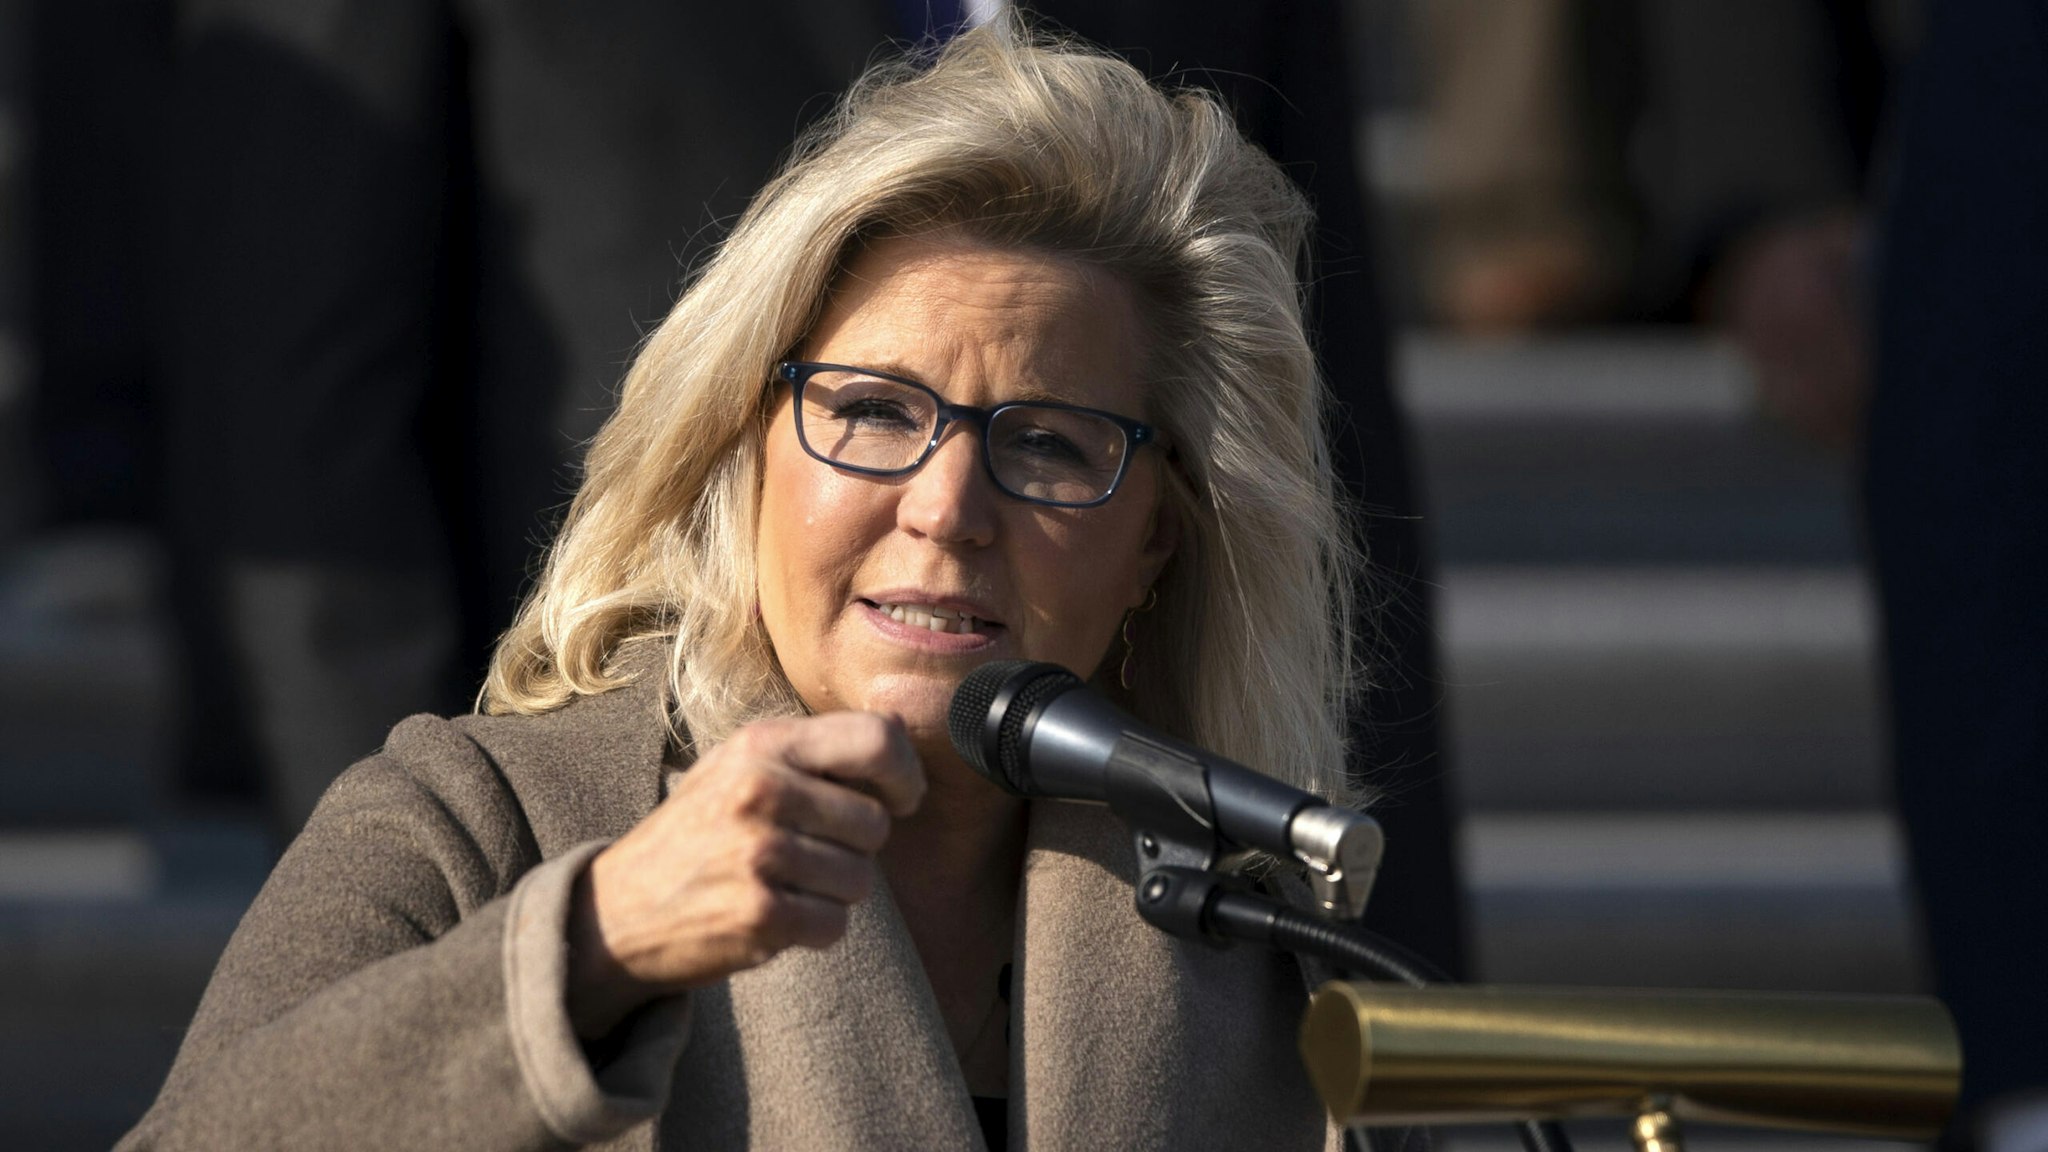 WASHINGTON, DC - DECEMBER 10: Rep. Liz Cheney (R-WY) speaks during a news conference with fellow House Republicans outside the U.S. Capitol December 10, 2020 in Washington, DC. McCarthy and House Republicans discussed their desire to extend the Paycheck Protection Program and provide relief for small business owners and their employees who have been hurt by the coronavirus pandemic.